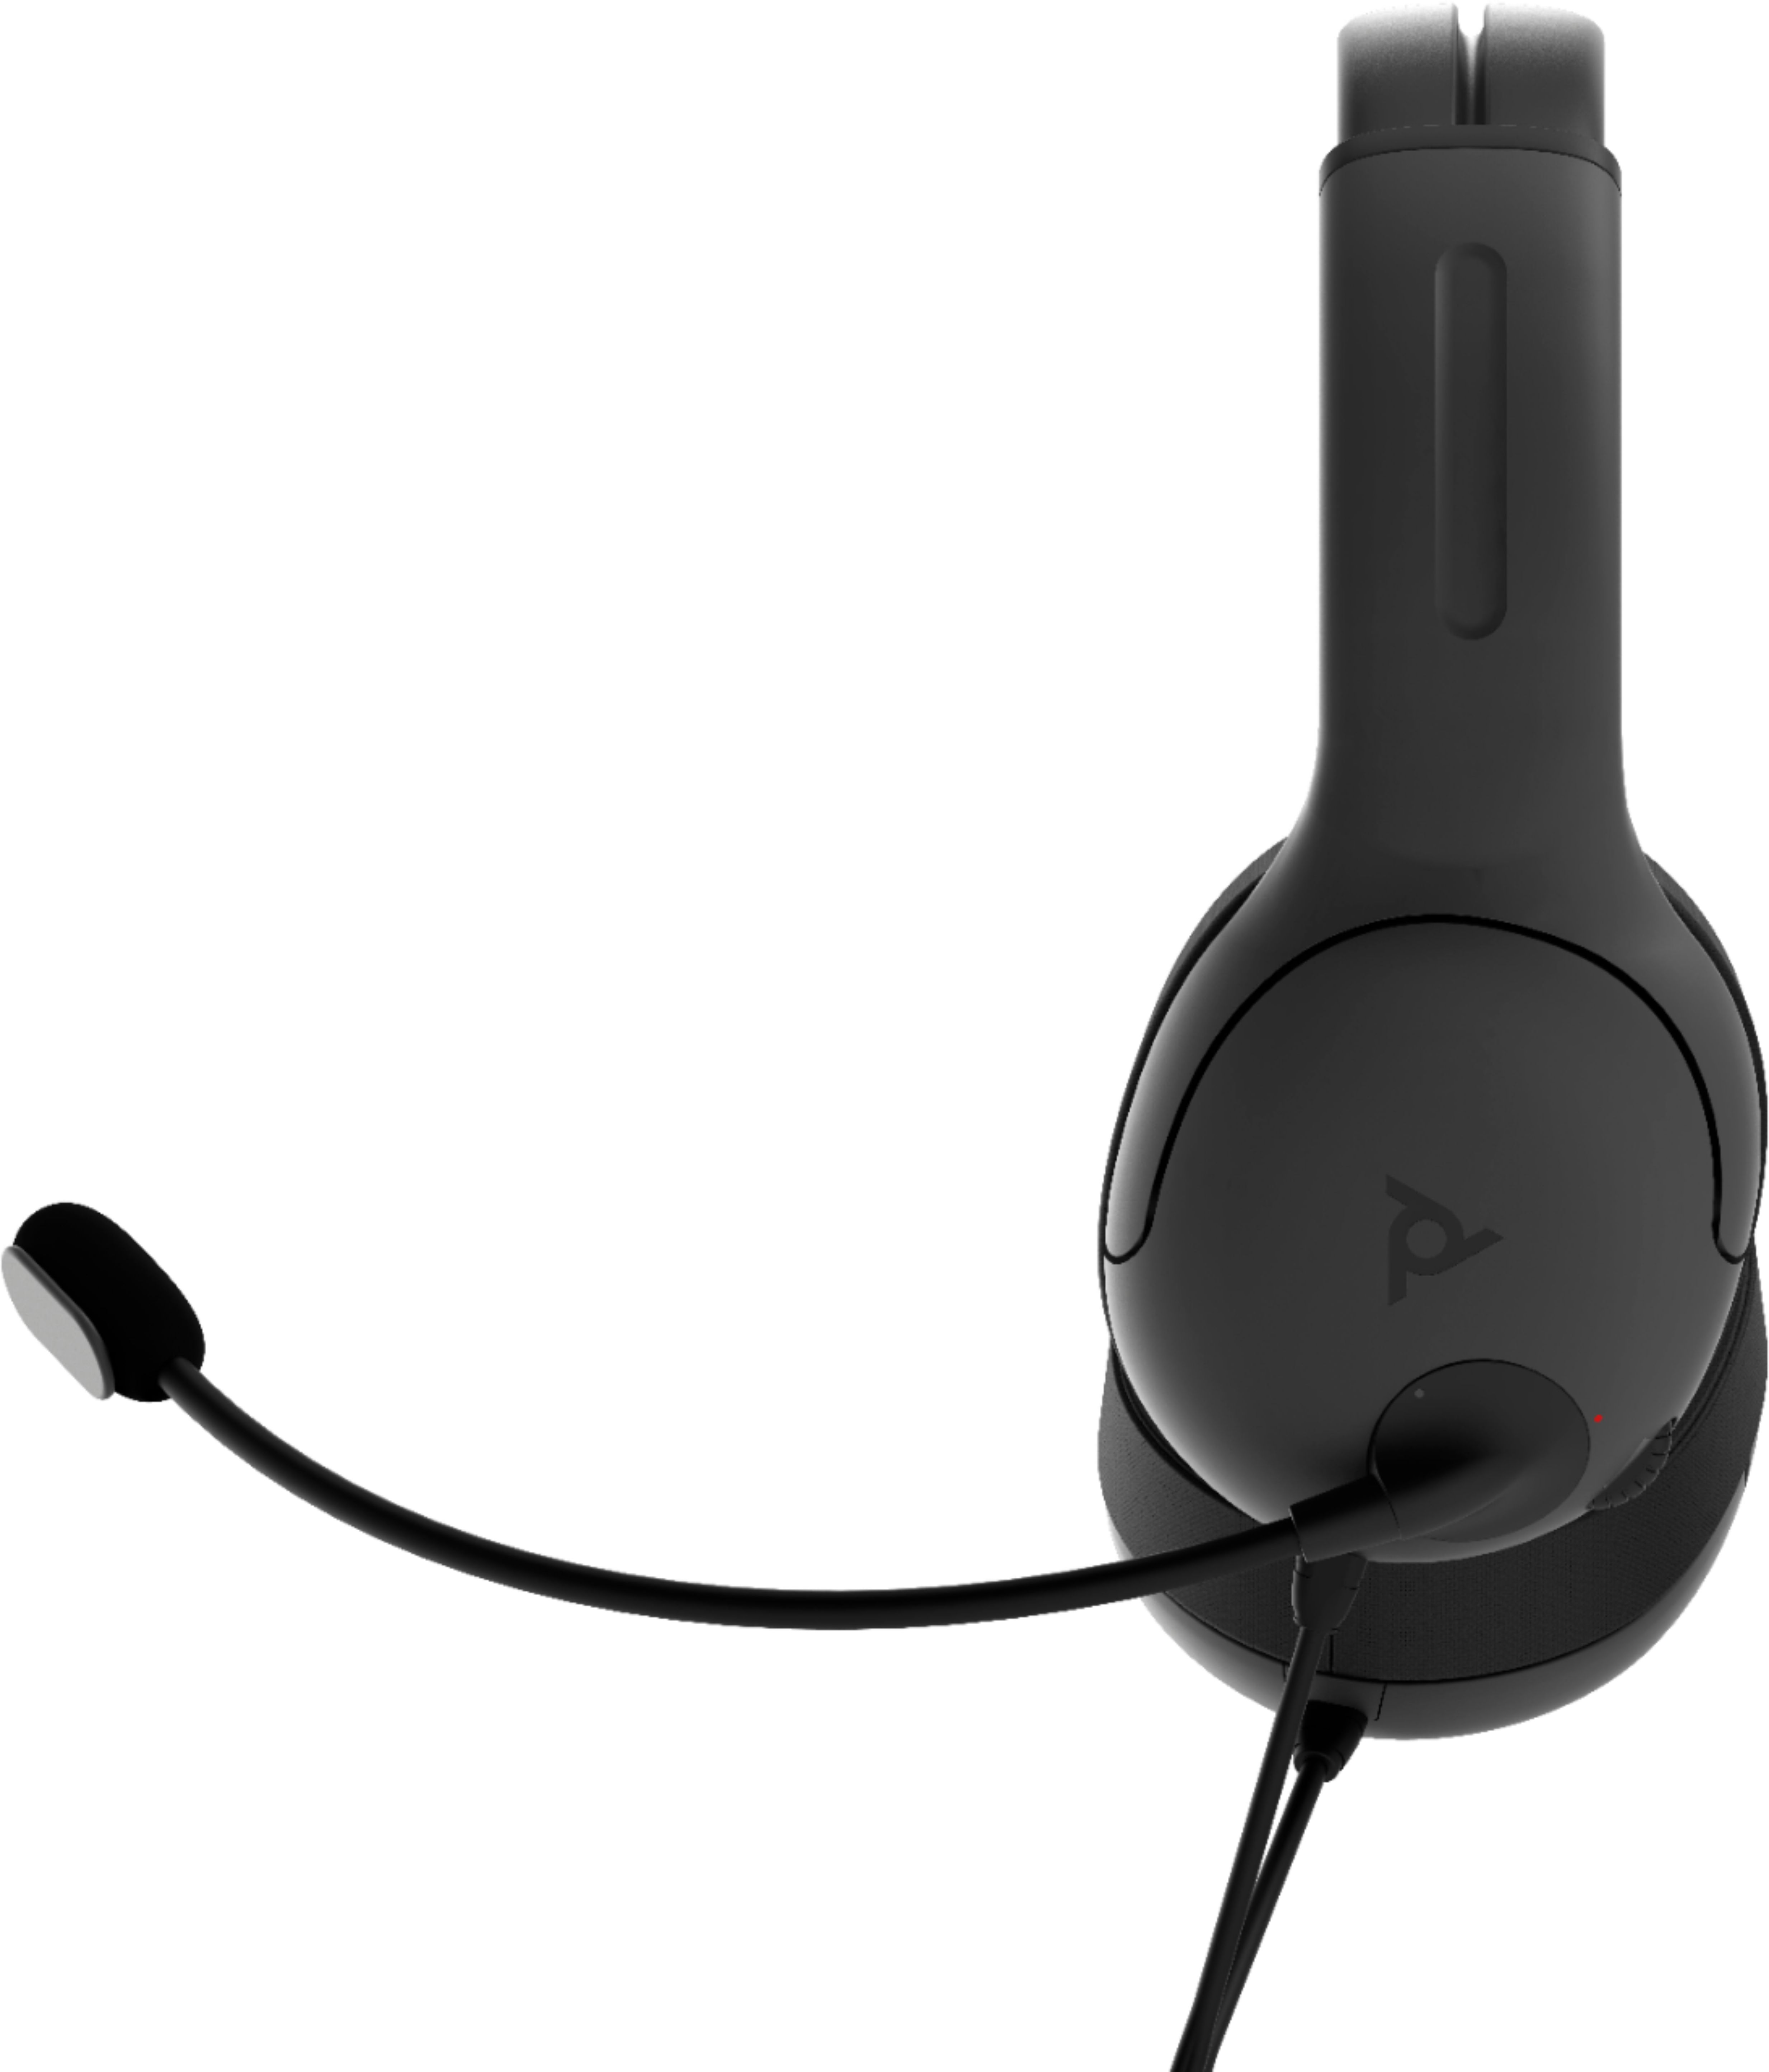 LVL 40 Wired Stereo Gaming Headset Review - Chat Mode ON